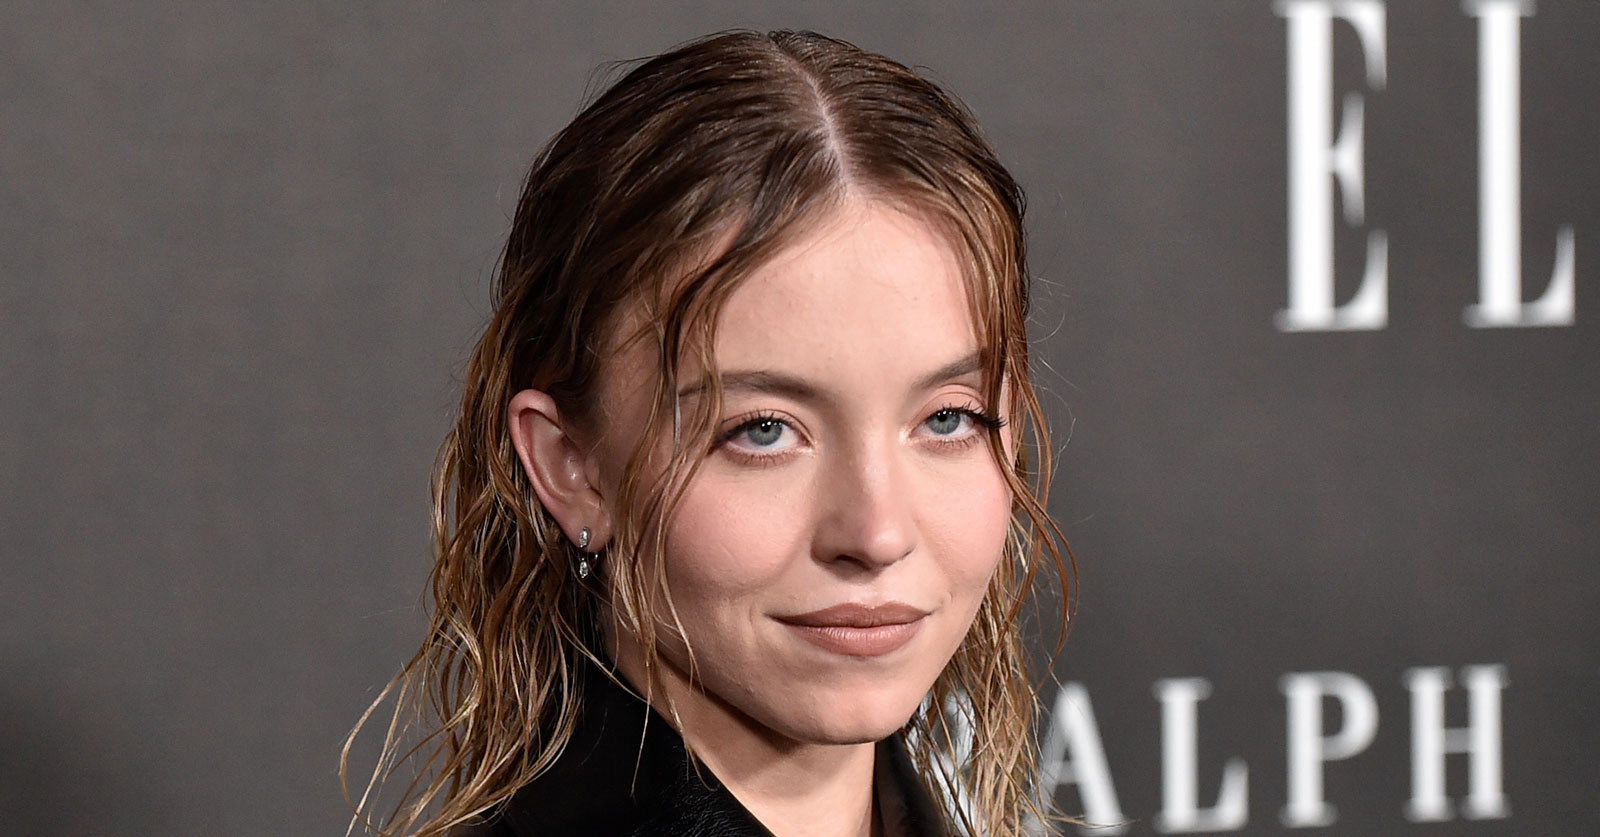 Sydney Sweeney's leather bra top might be her most badass look to date